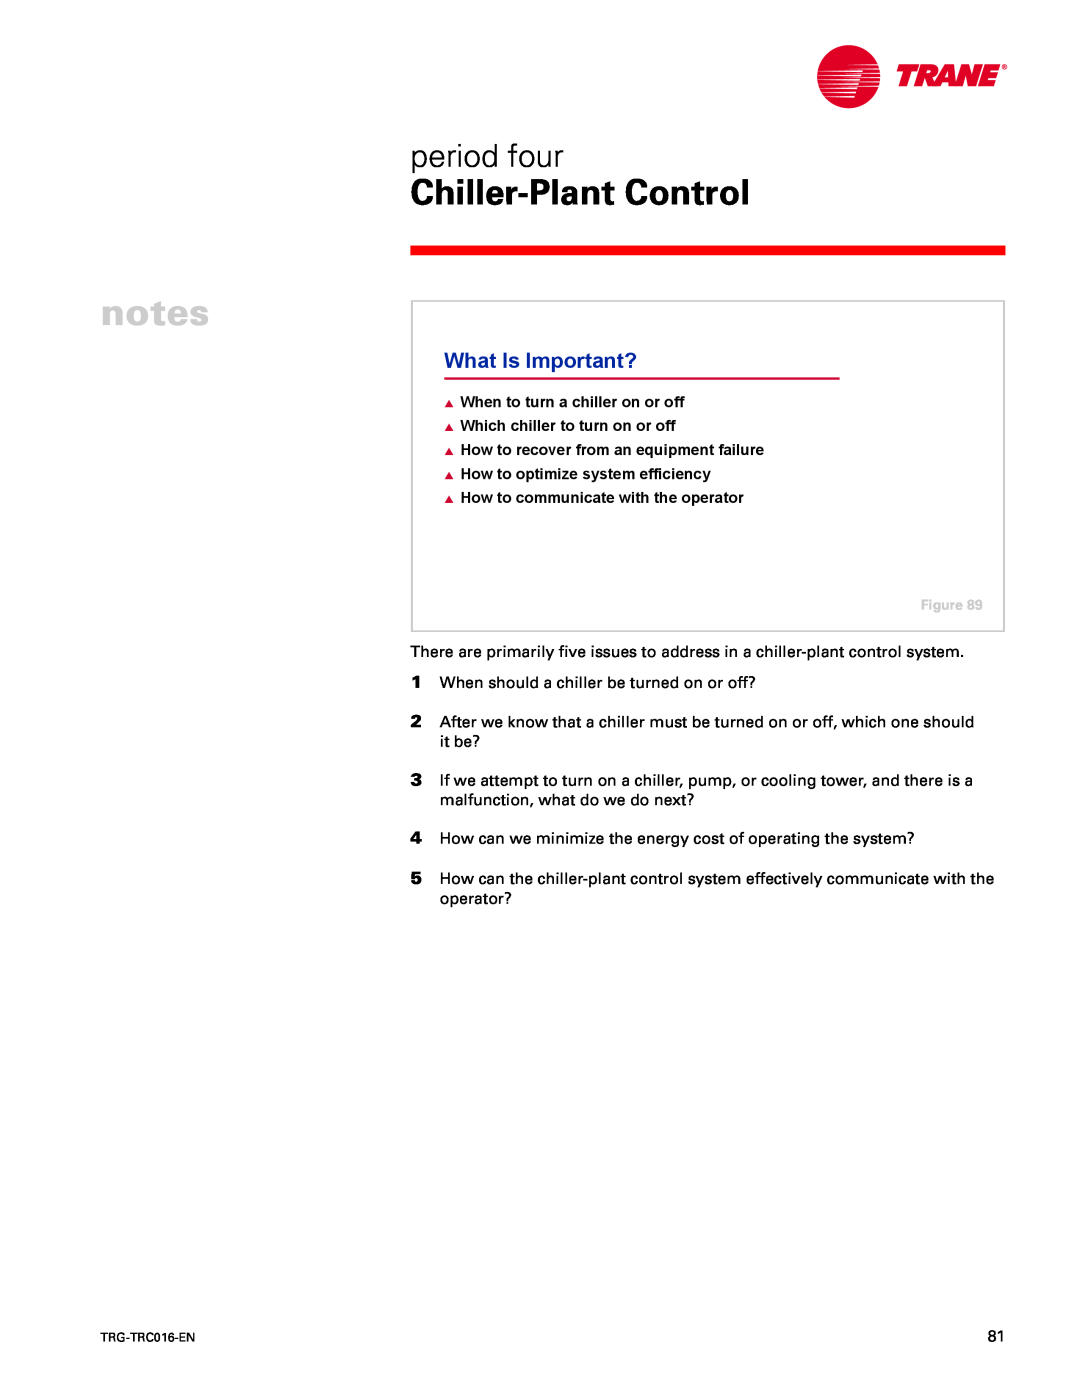 Trane TRG-TRC016-EN manual What Is Important?, notes, Chiller-PlantControl, period four, When to turn a chiller on or off 